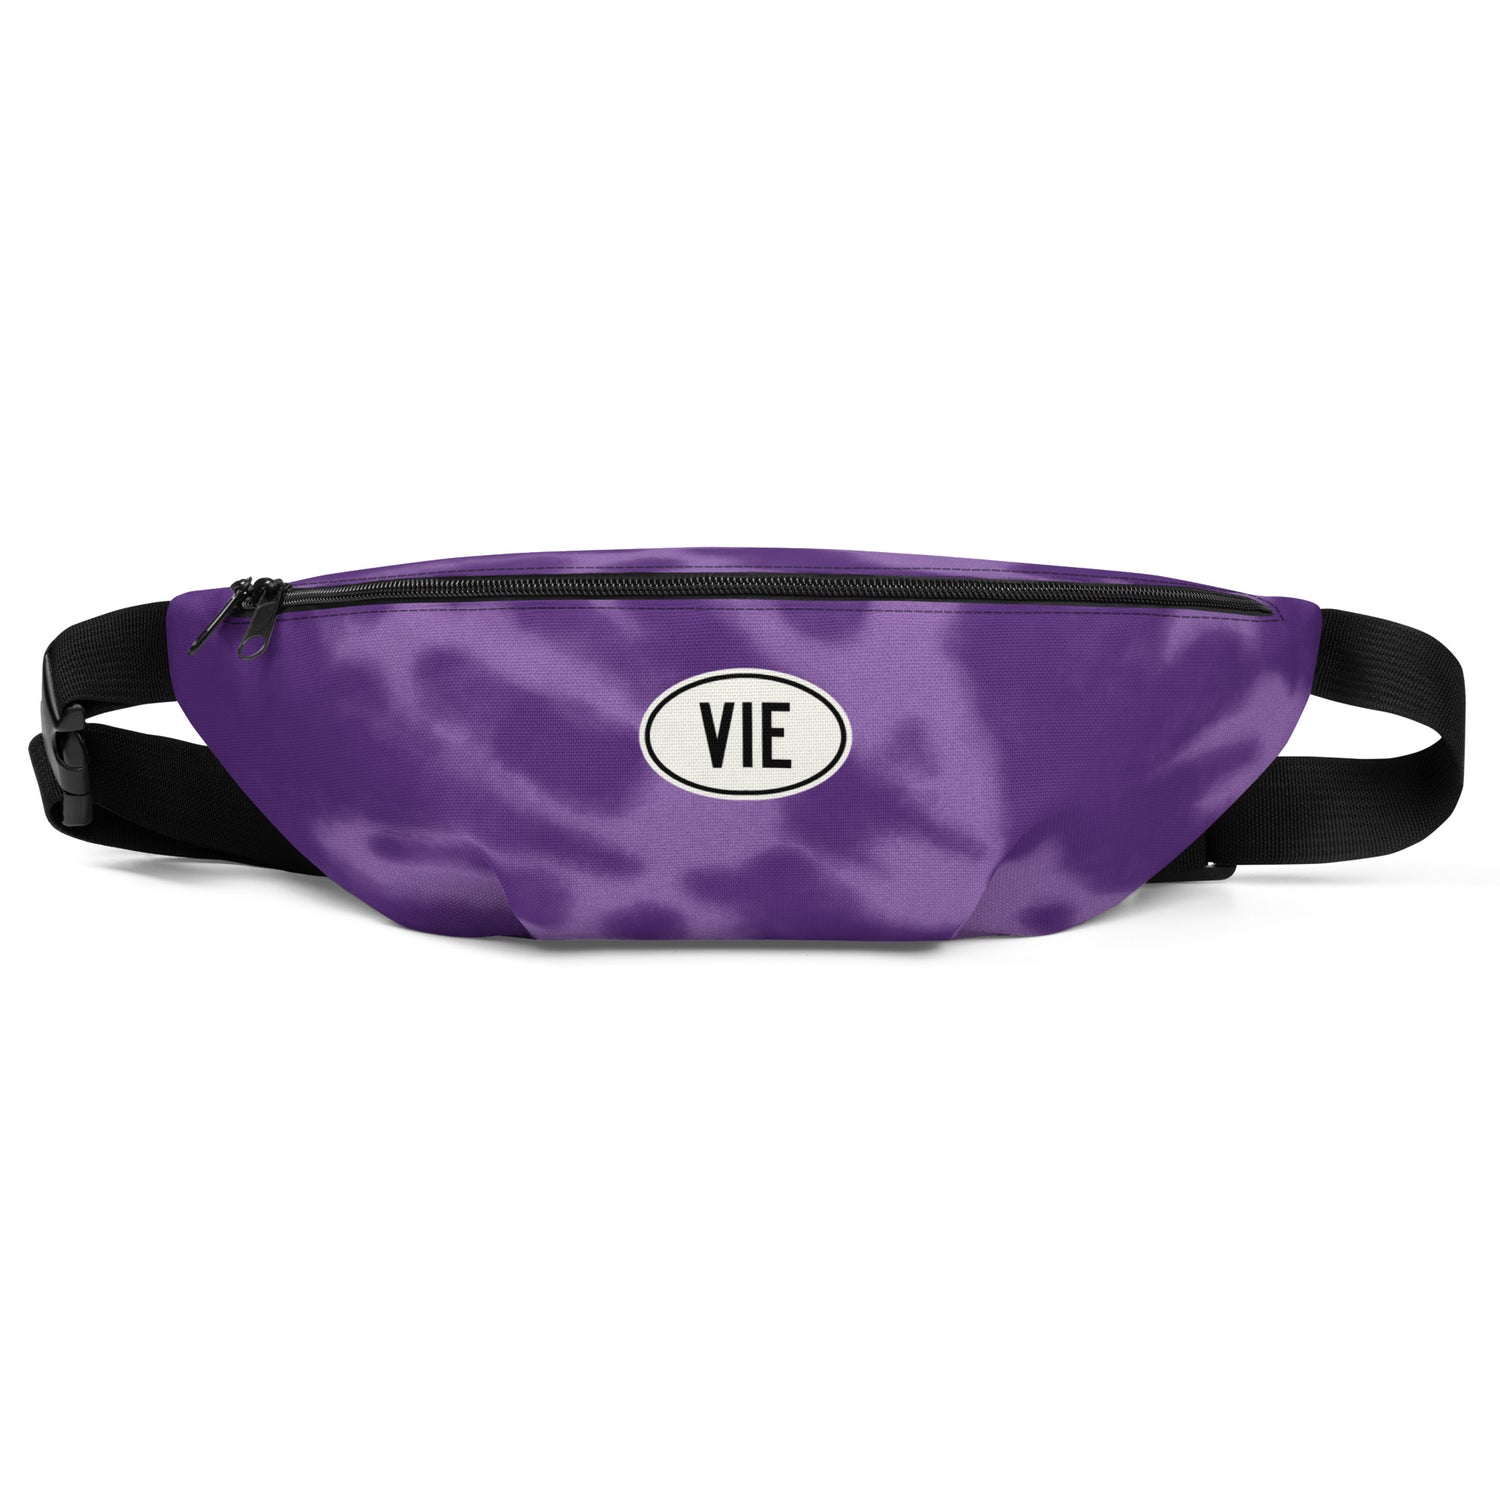 Vienna Austria Backpacks, Fanny Packs and Tote Bags • VIE Airport Code